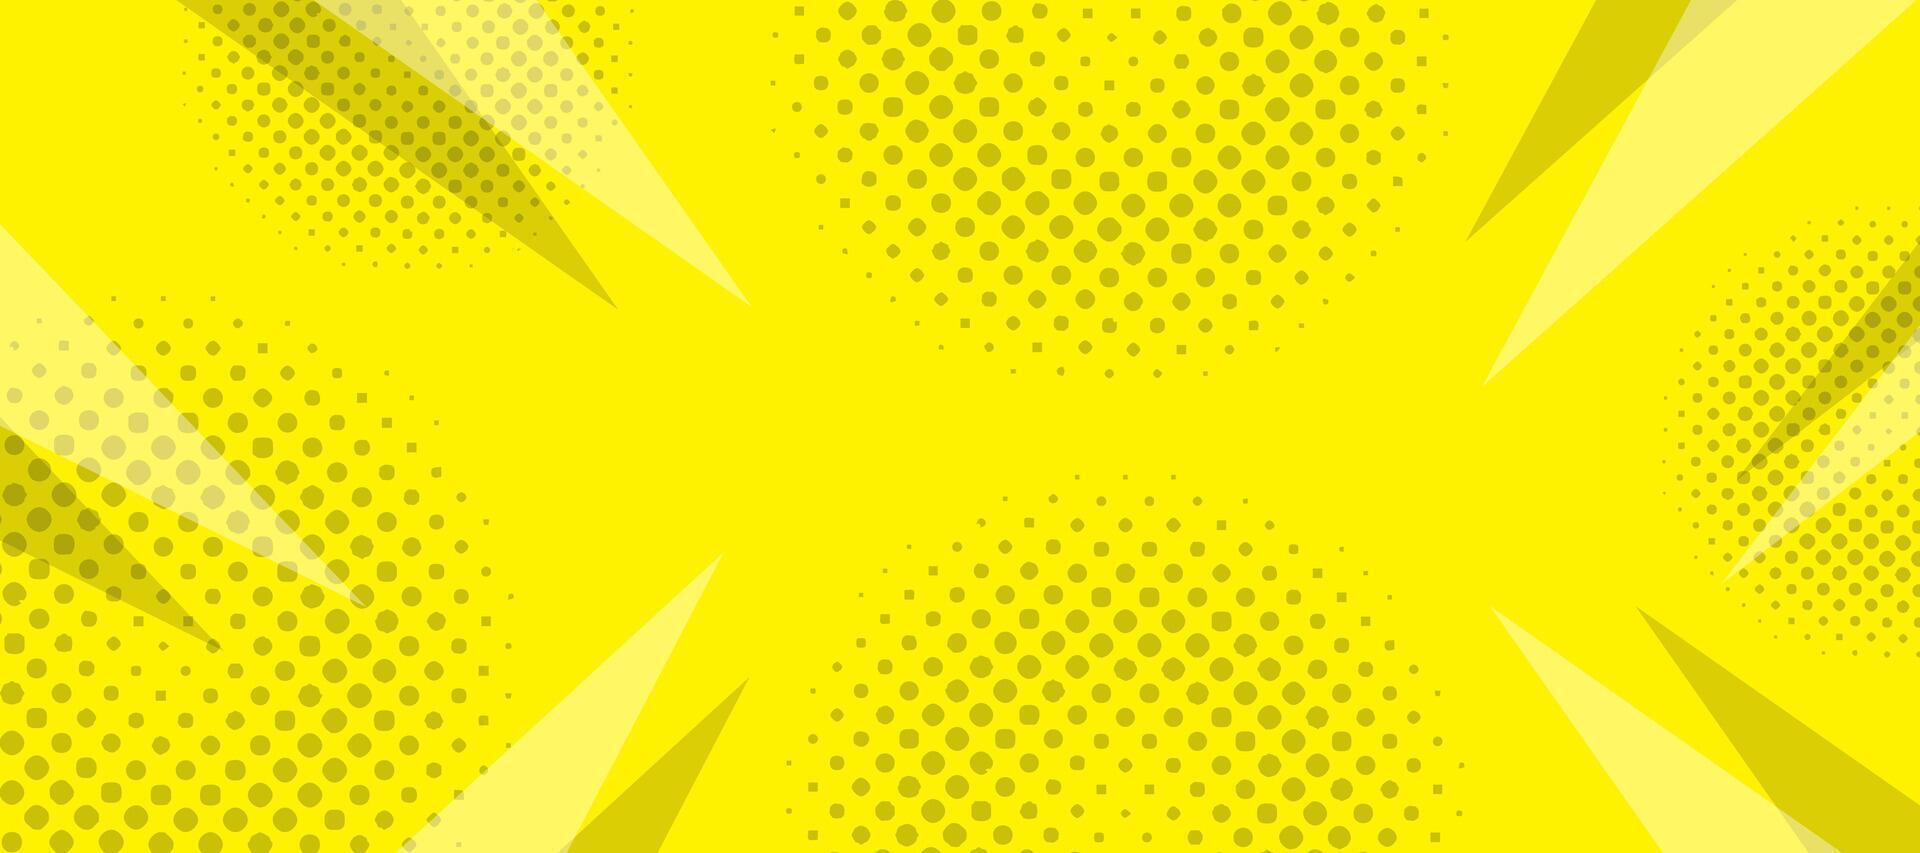 Abstract yellow comic style background. Pop art halftone banner illustration design vector